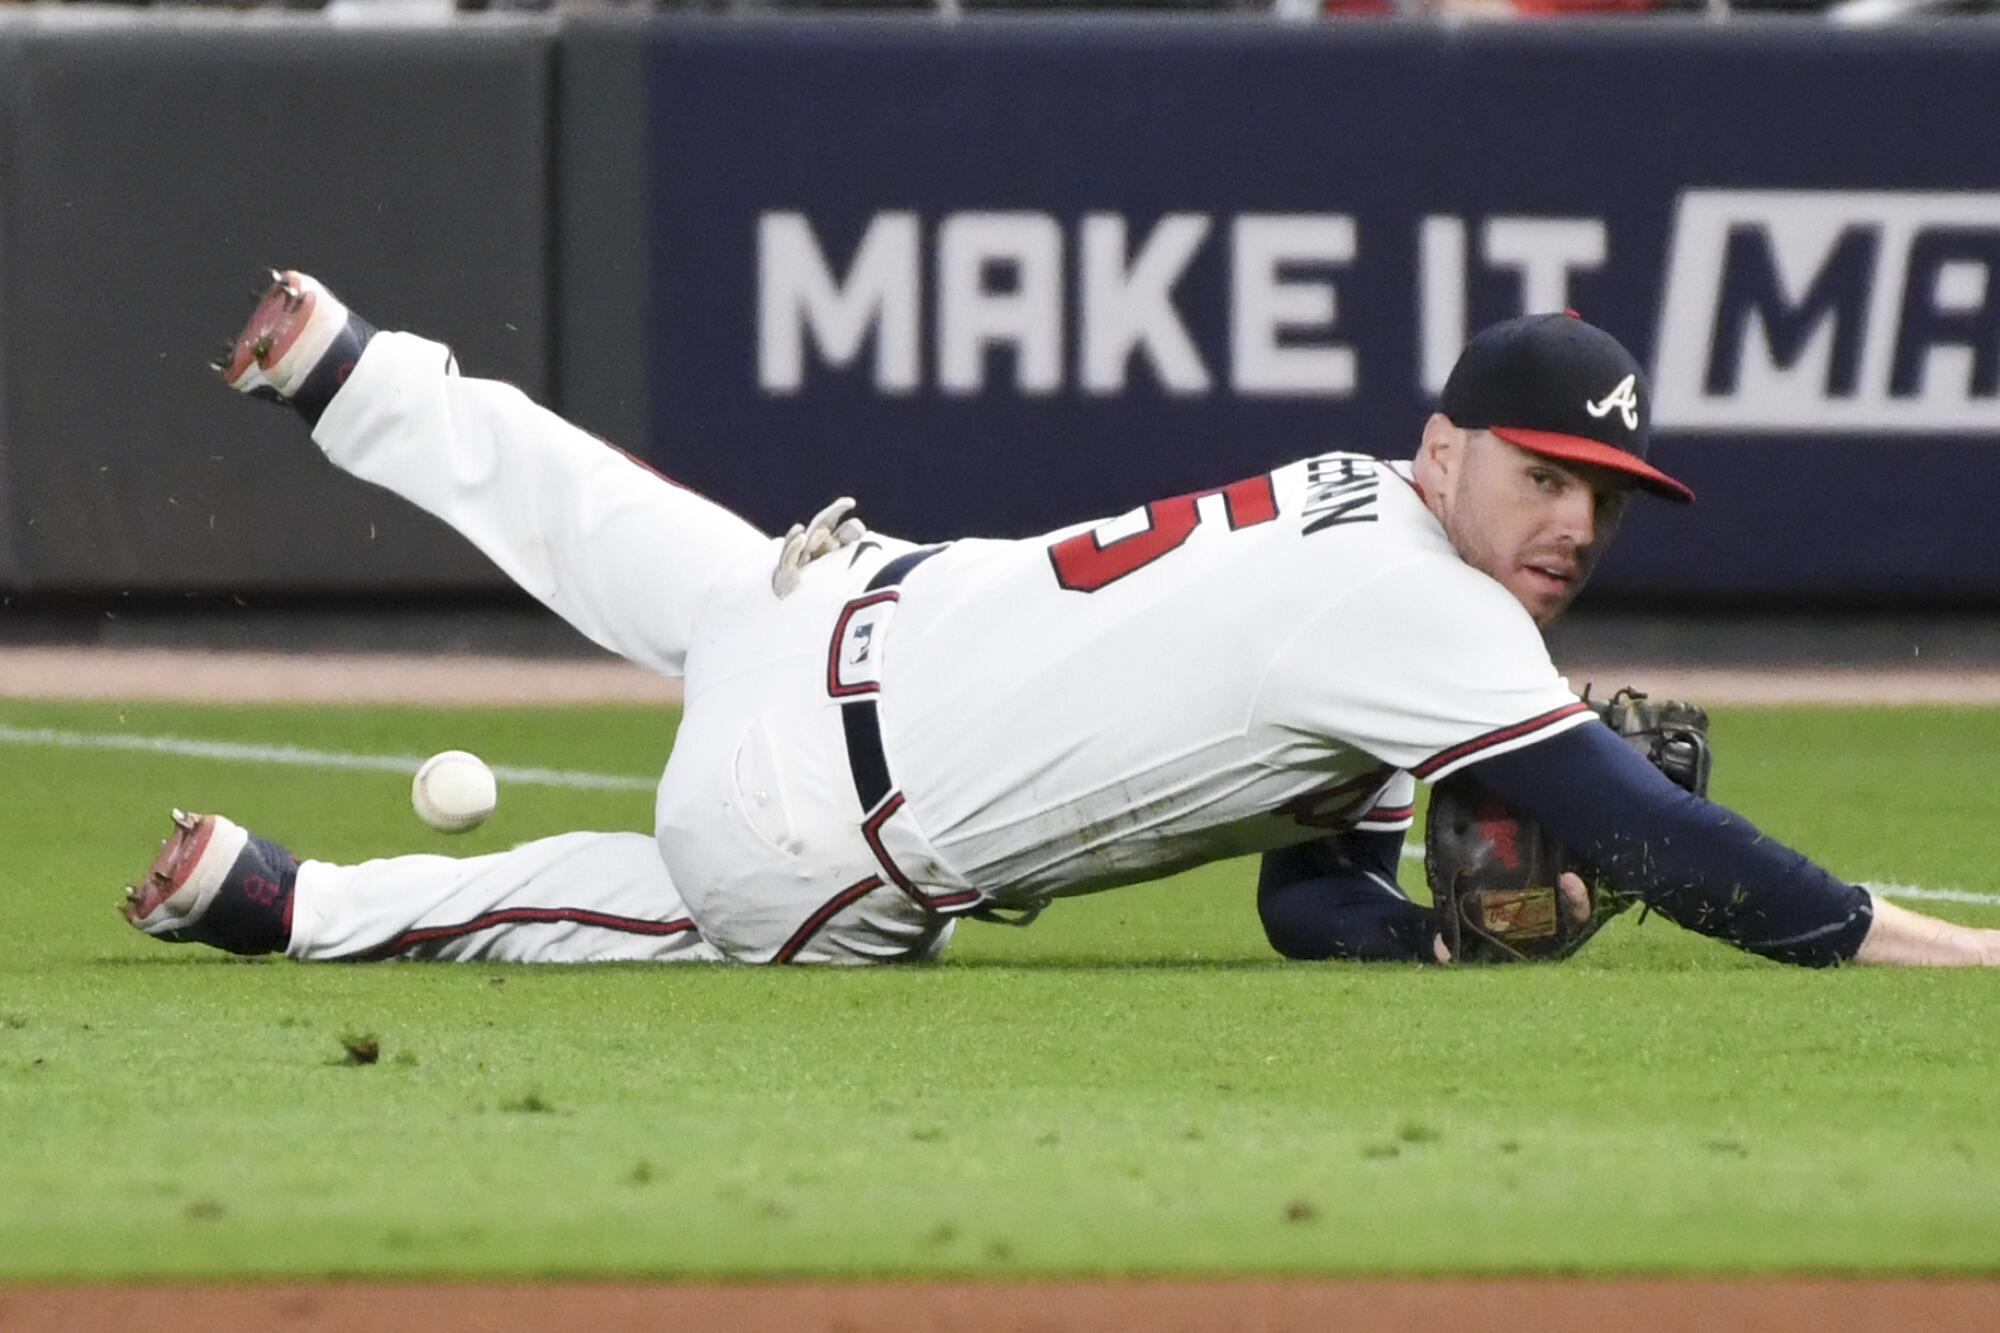 Braves first baseman Freddie Freeman can't make a catch on a pop up fly by Dodgers' Mookie Betts